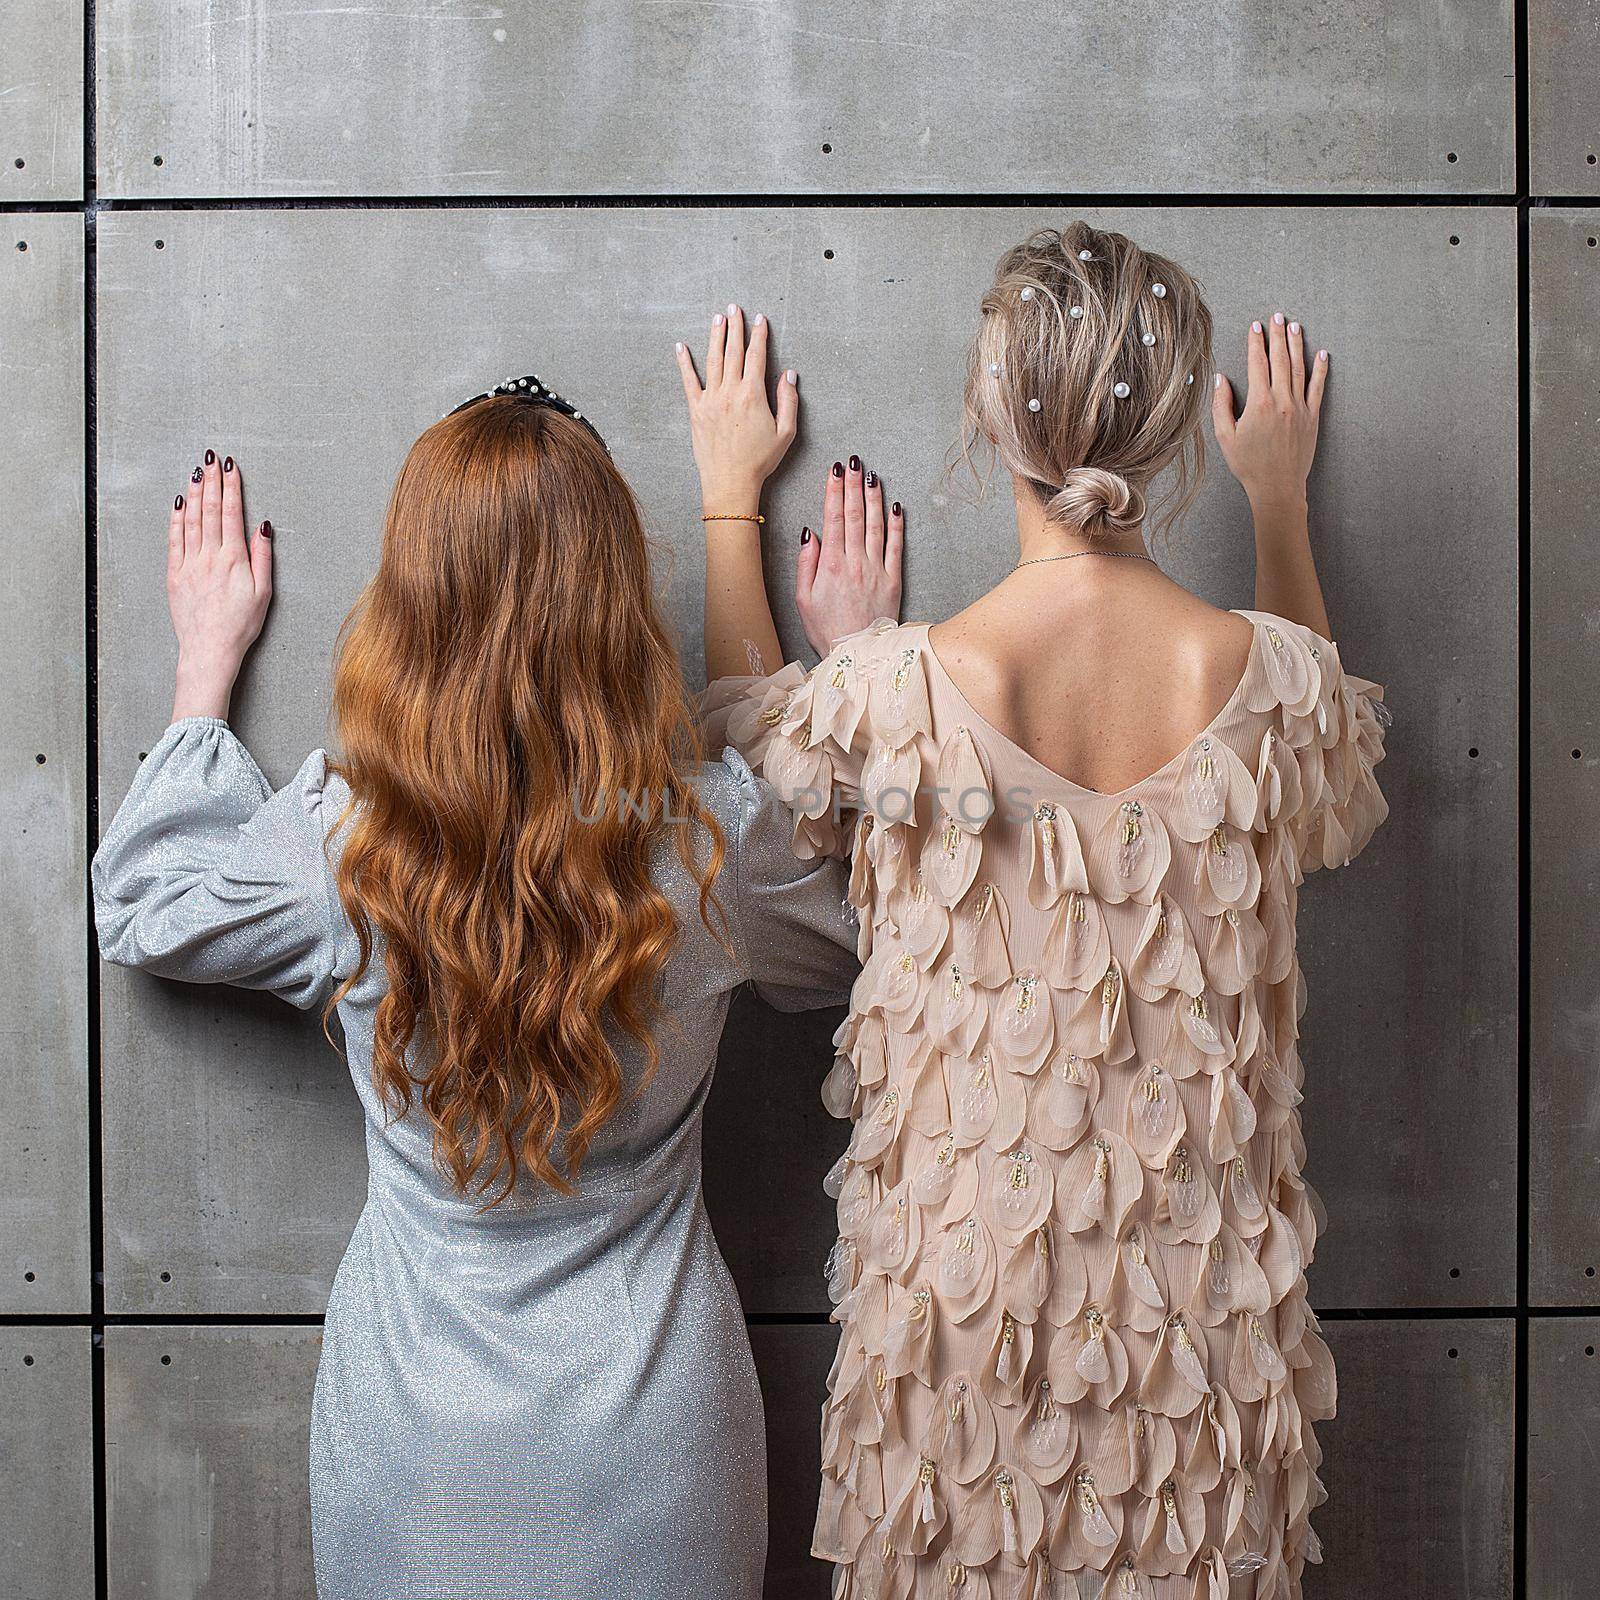 two girls standing against wall, rear view. females lean their hands on wall by artemzatsepilin